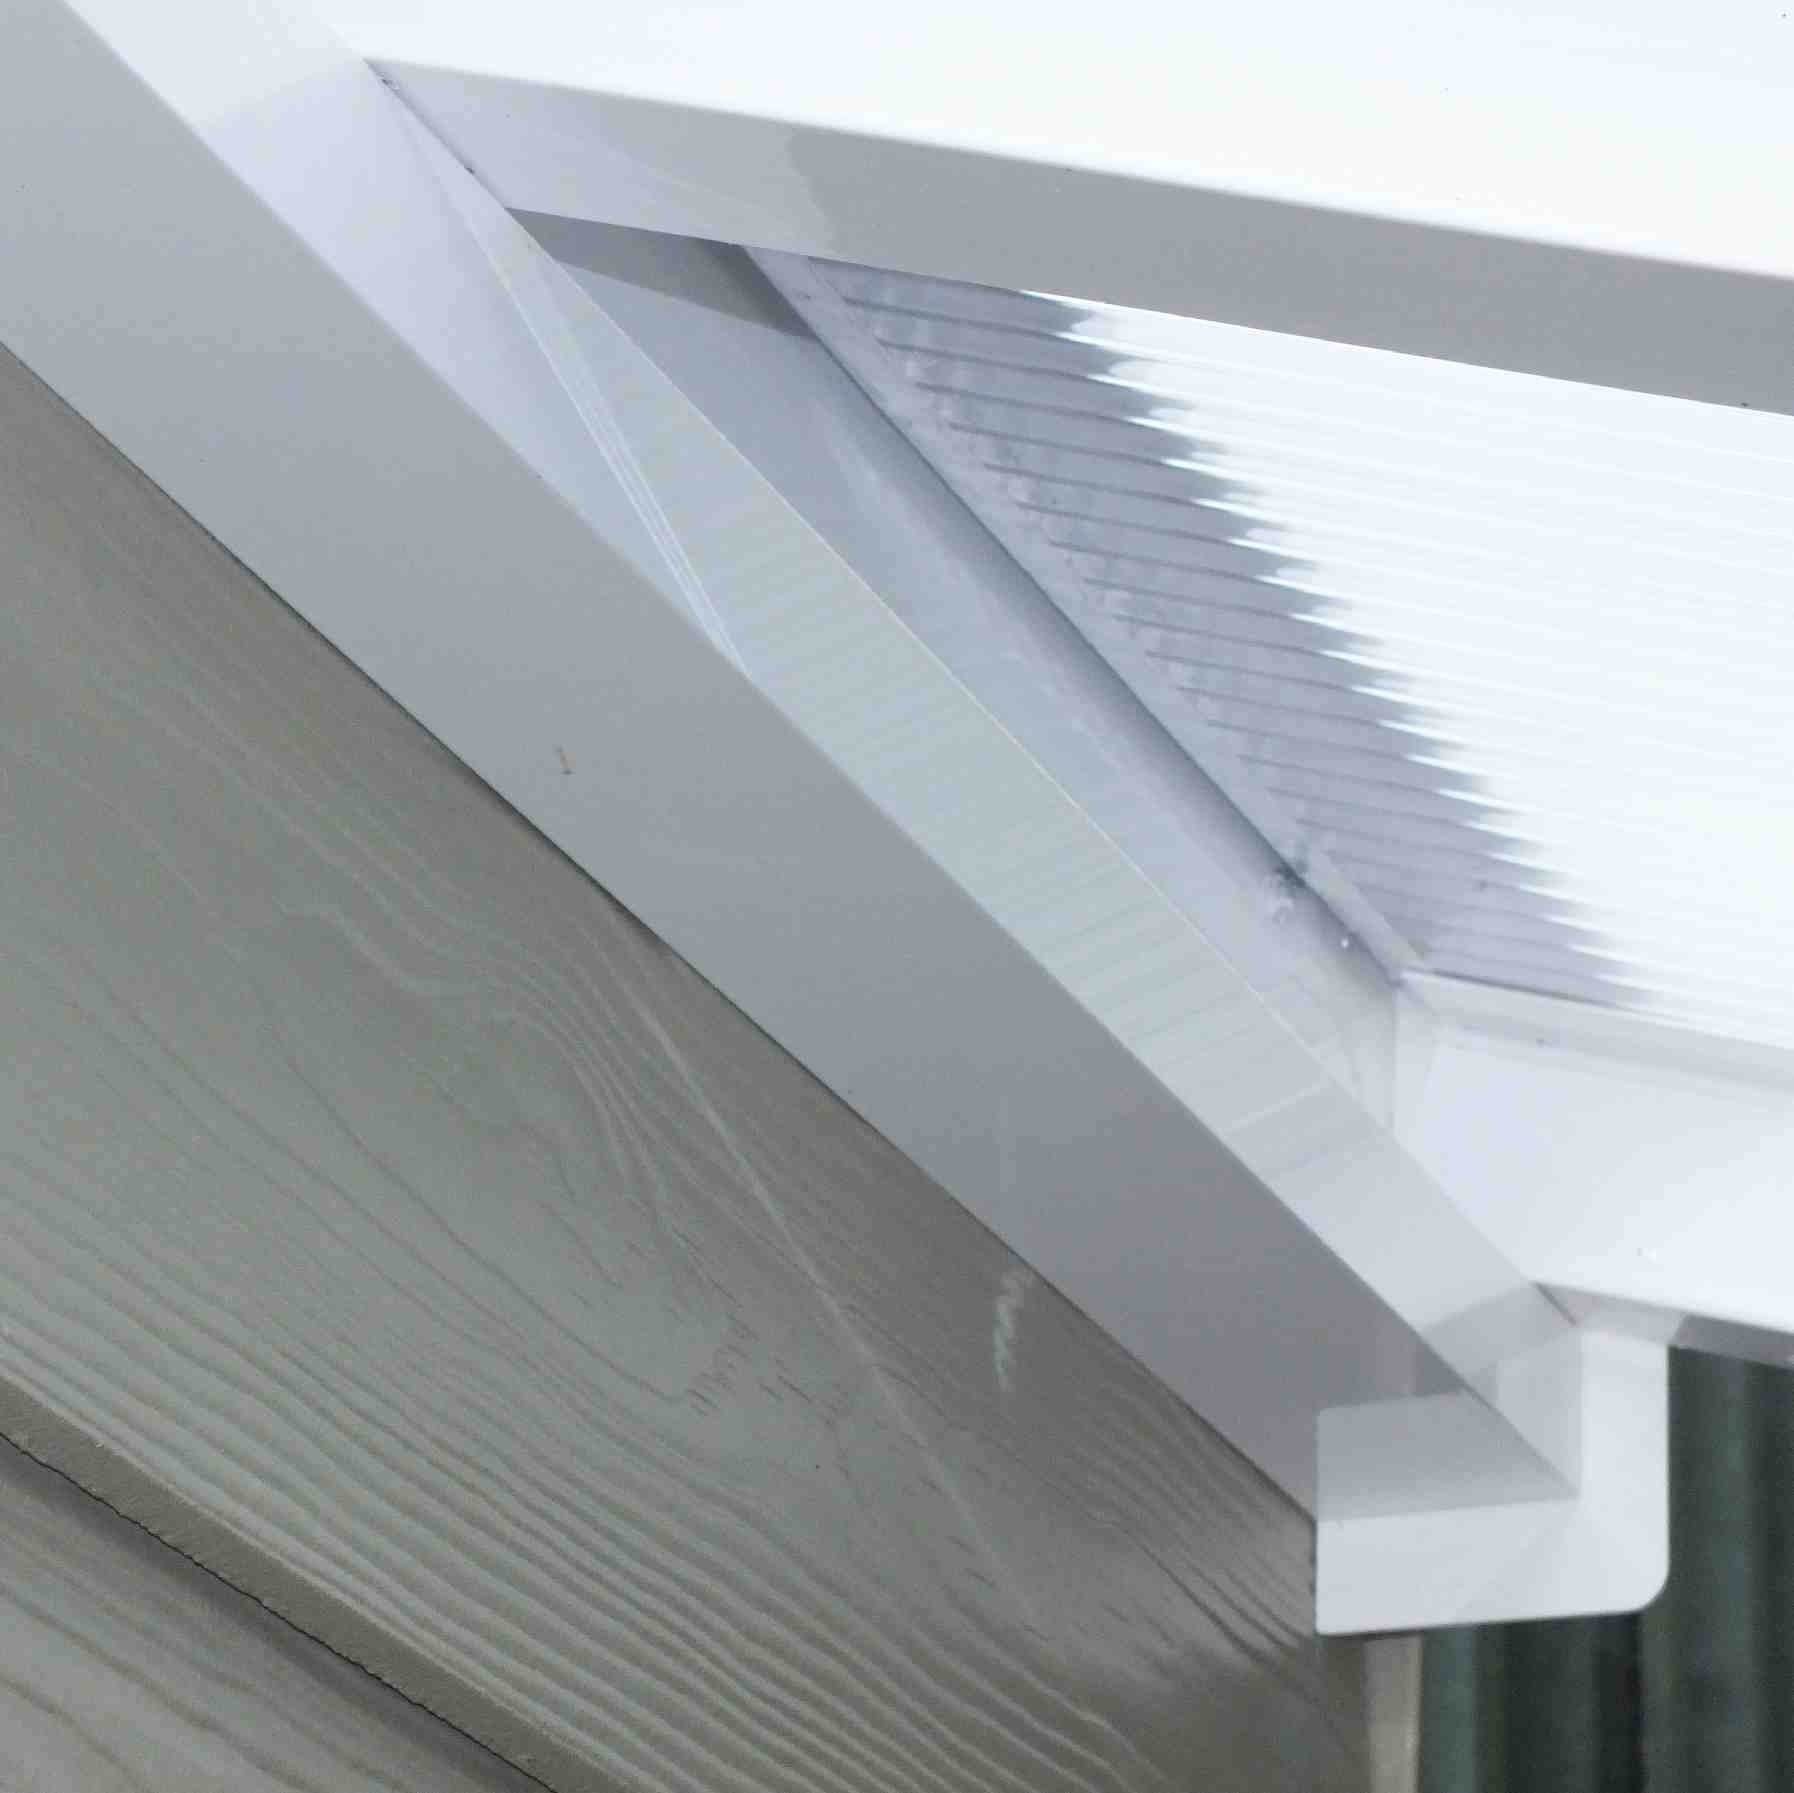 Great deals on Omega Verandah White with 16mm Polycarbonate Glazing - 6.0m (W) x 2.0m (P), (3) Supporting Posts